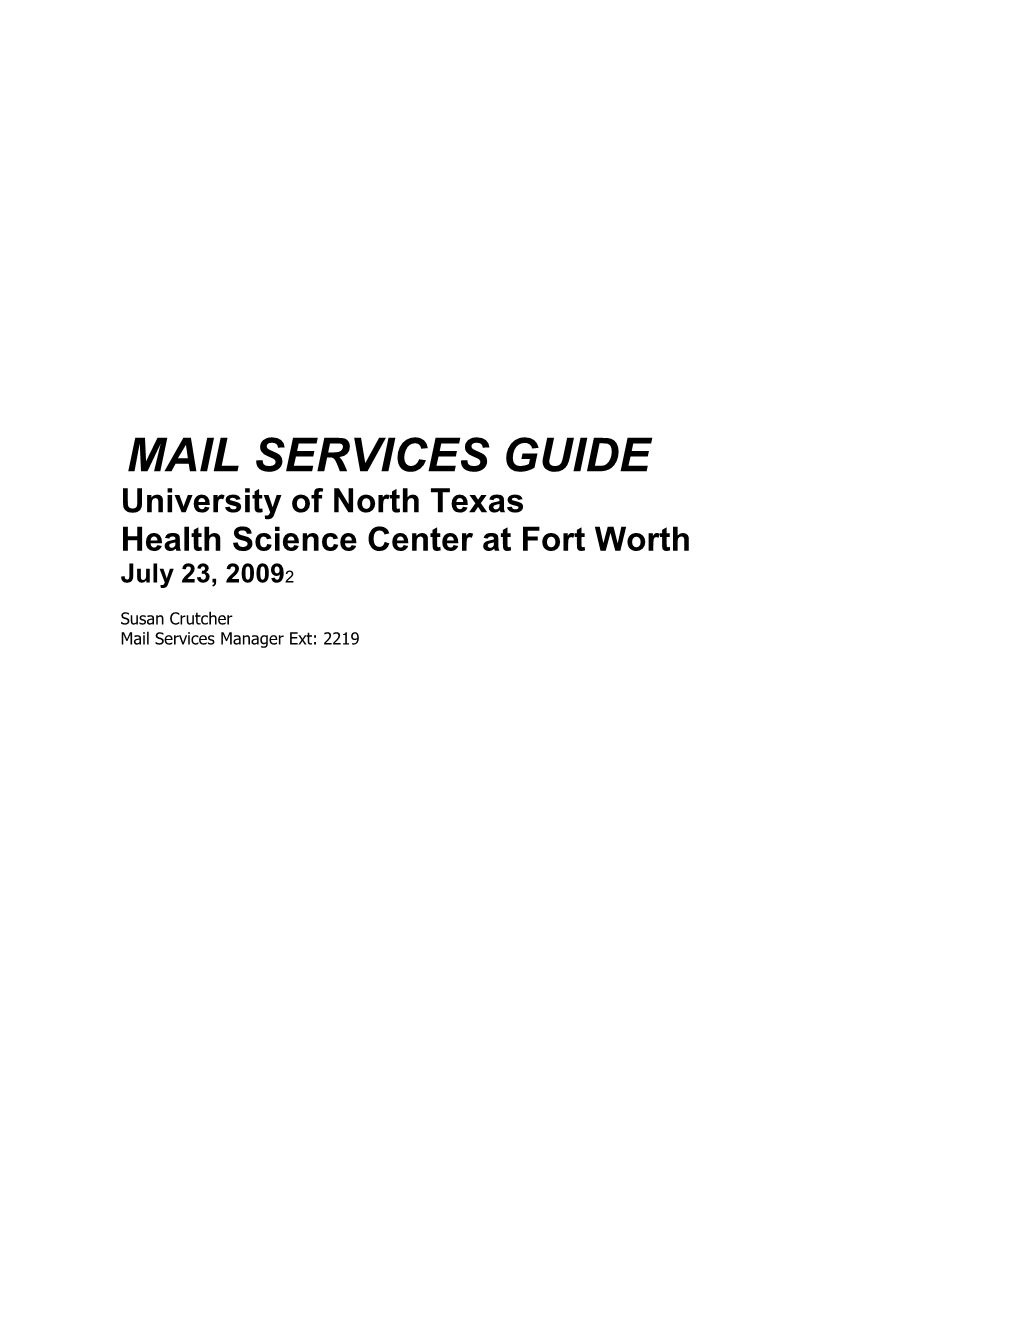 MAIL SERVICES GUIDE University of North Texas Health Science Center at Fort Worth July 23, 20092